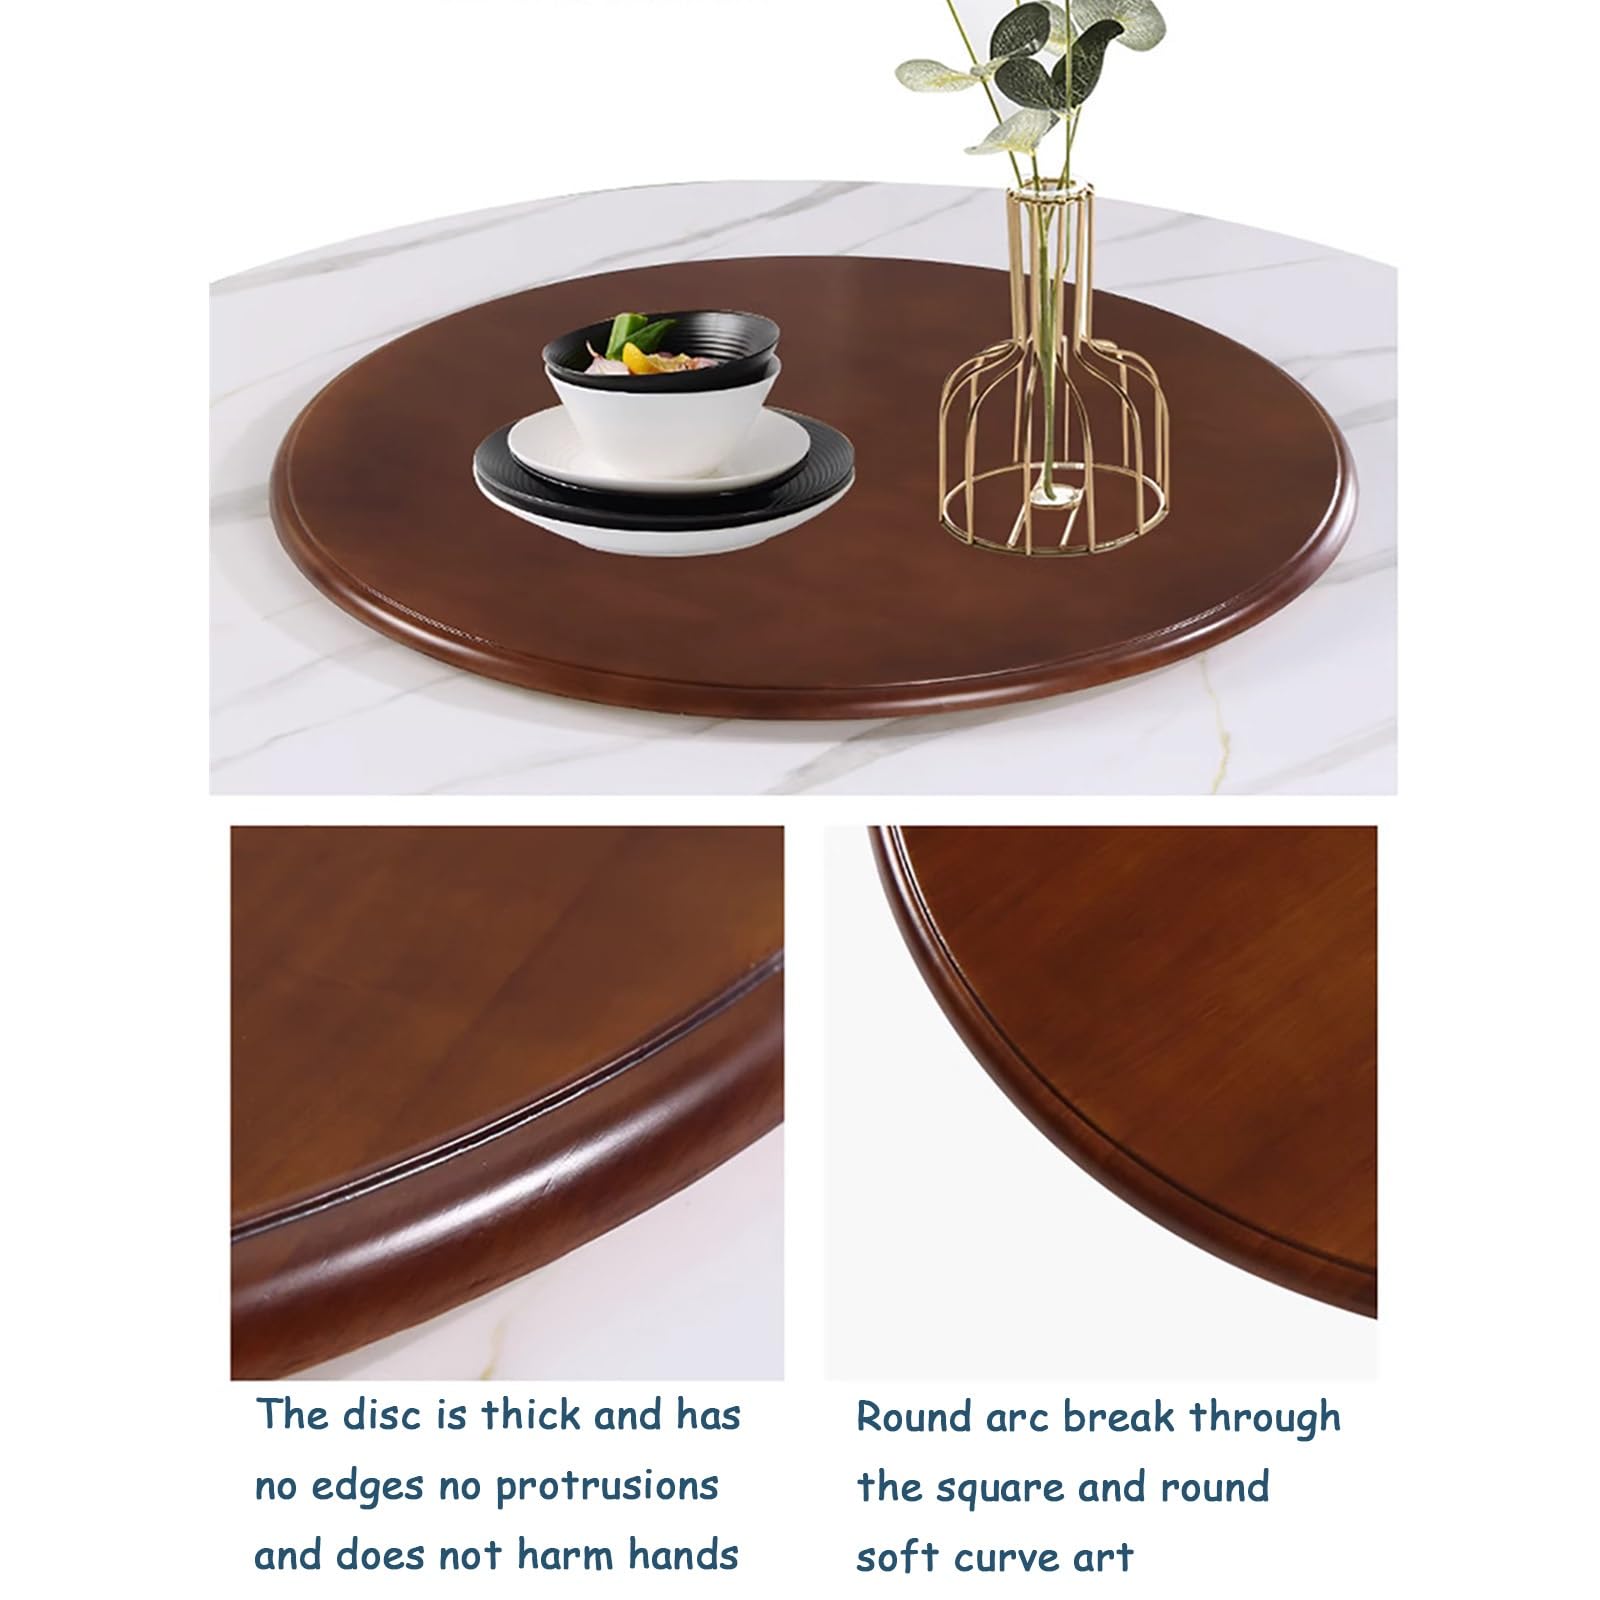 Wood Lazy Susan Turntable Φ24/27/31/35/39/43in, Heat Resistant Rotating Serving Tray, Abrasion Resistant Dining Table Turntable 360° Rotating, Transform Your Dining Experience for Sharing Food Easier